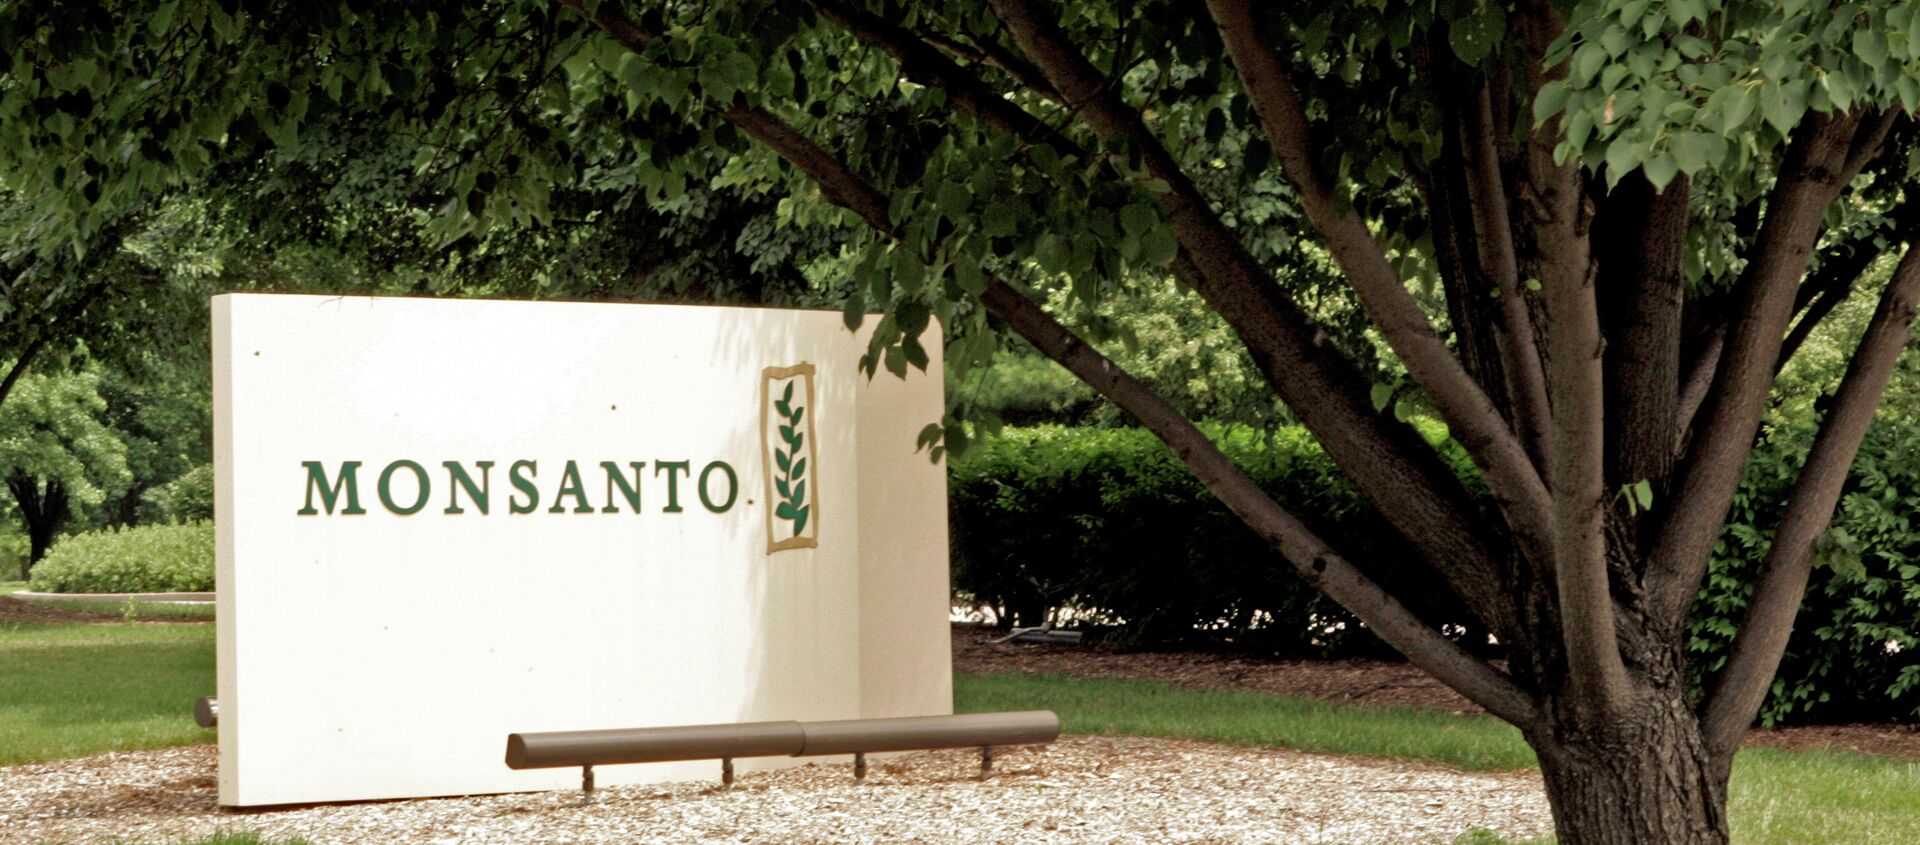 A complex merger designed to lower their tax payments could see US agrochemical giant Monsanto merge with its Swiss rival, Syngenta, to create an entity based in the UK. - Sputnik International, 1920, 08.01.2019